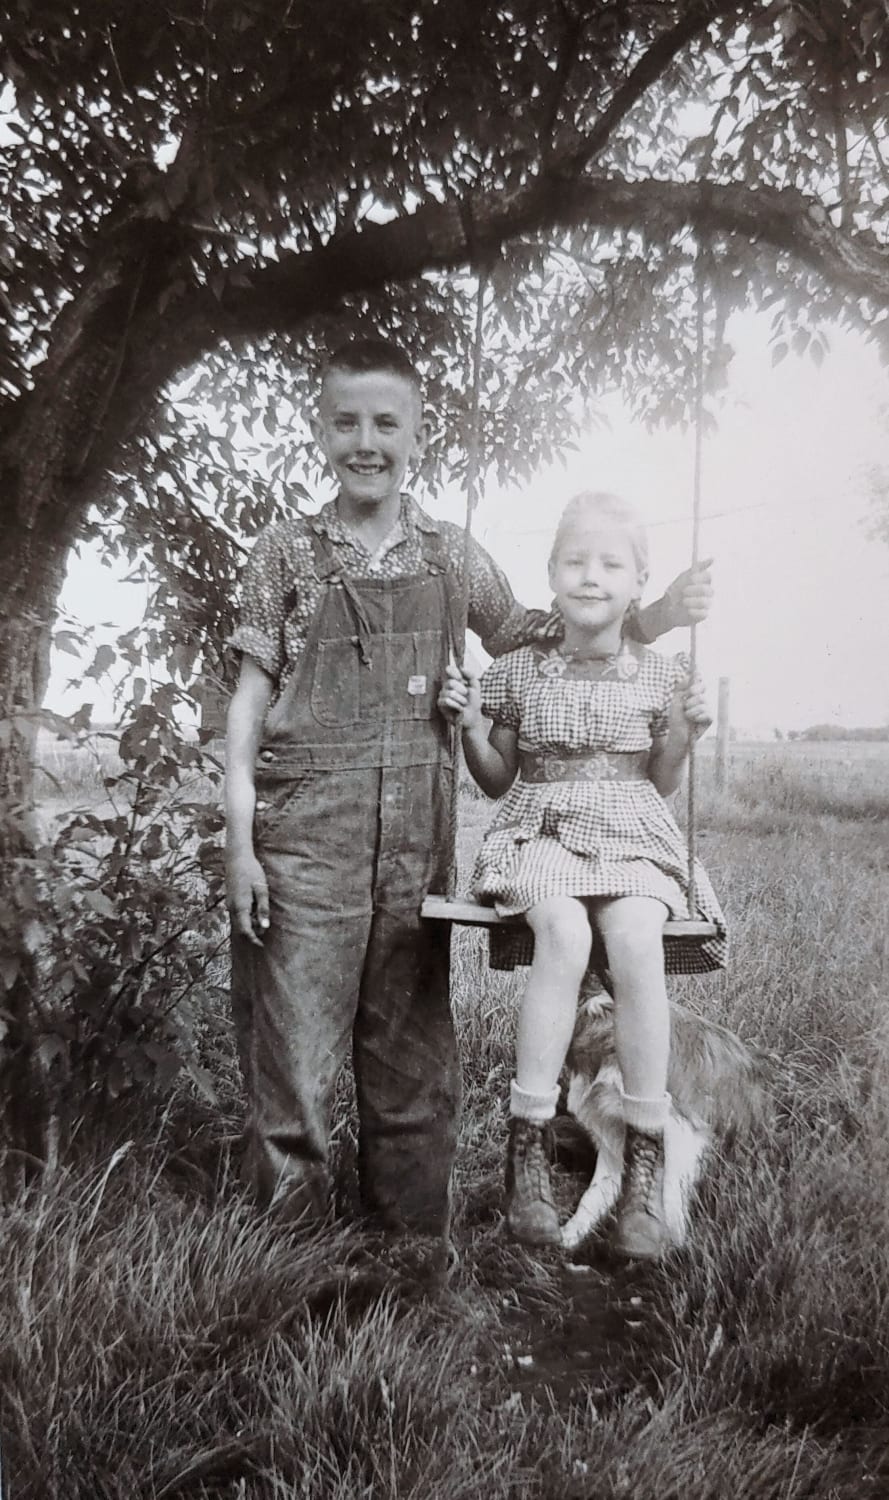 My Mom and uncle on their farm in eastern ND, late '30s or early '40s.